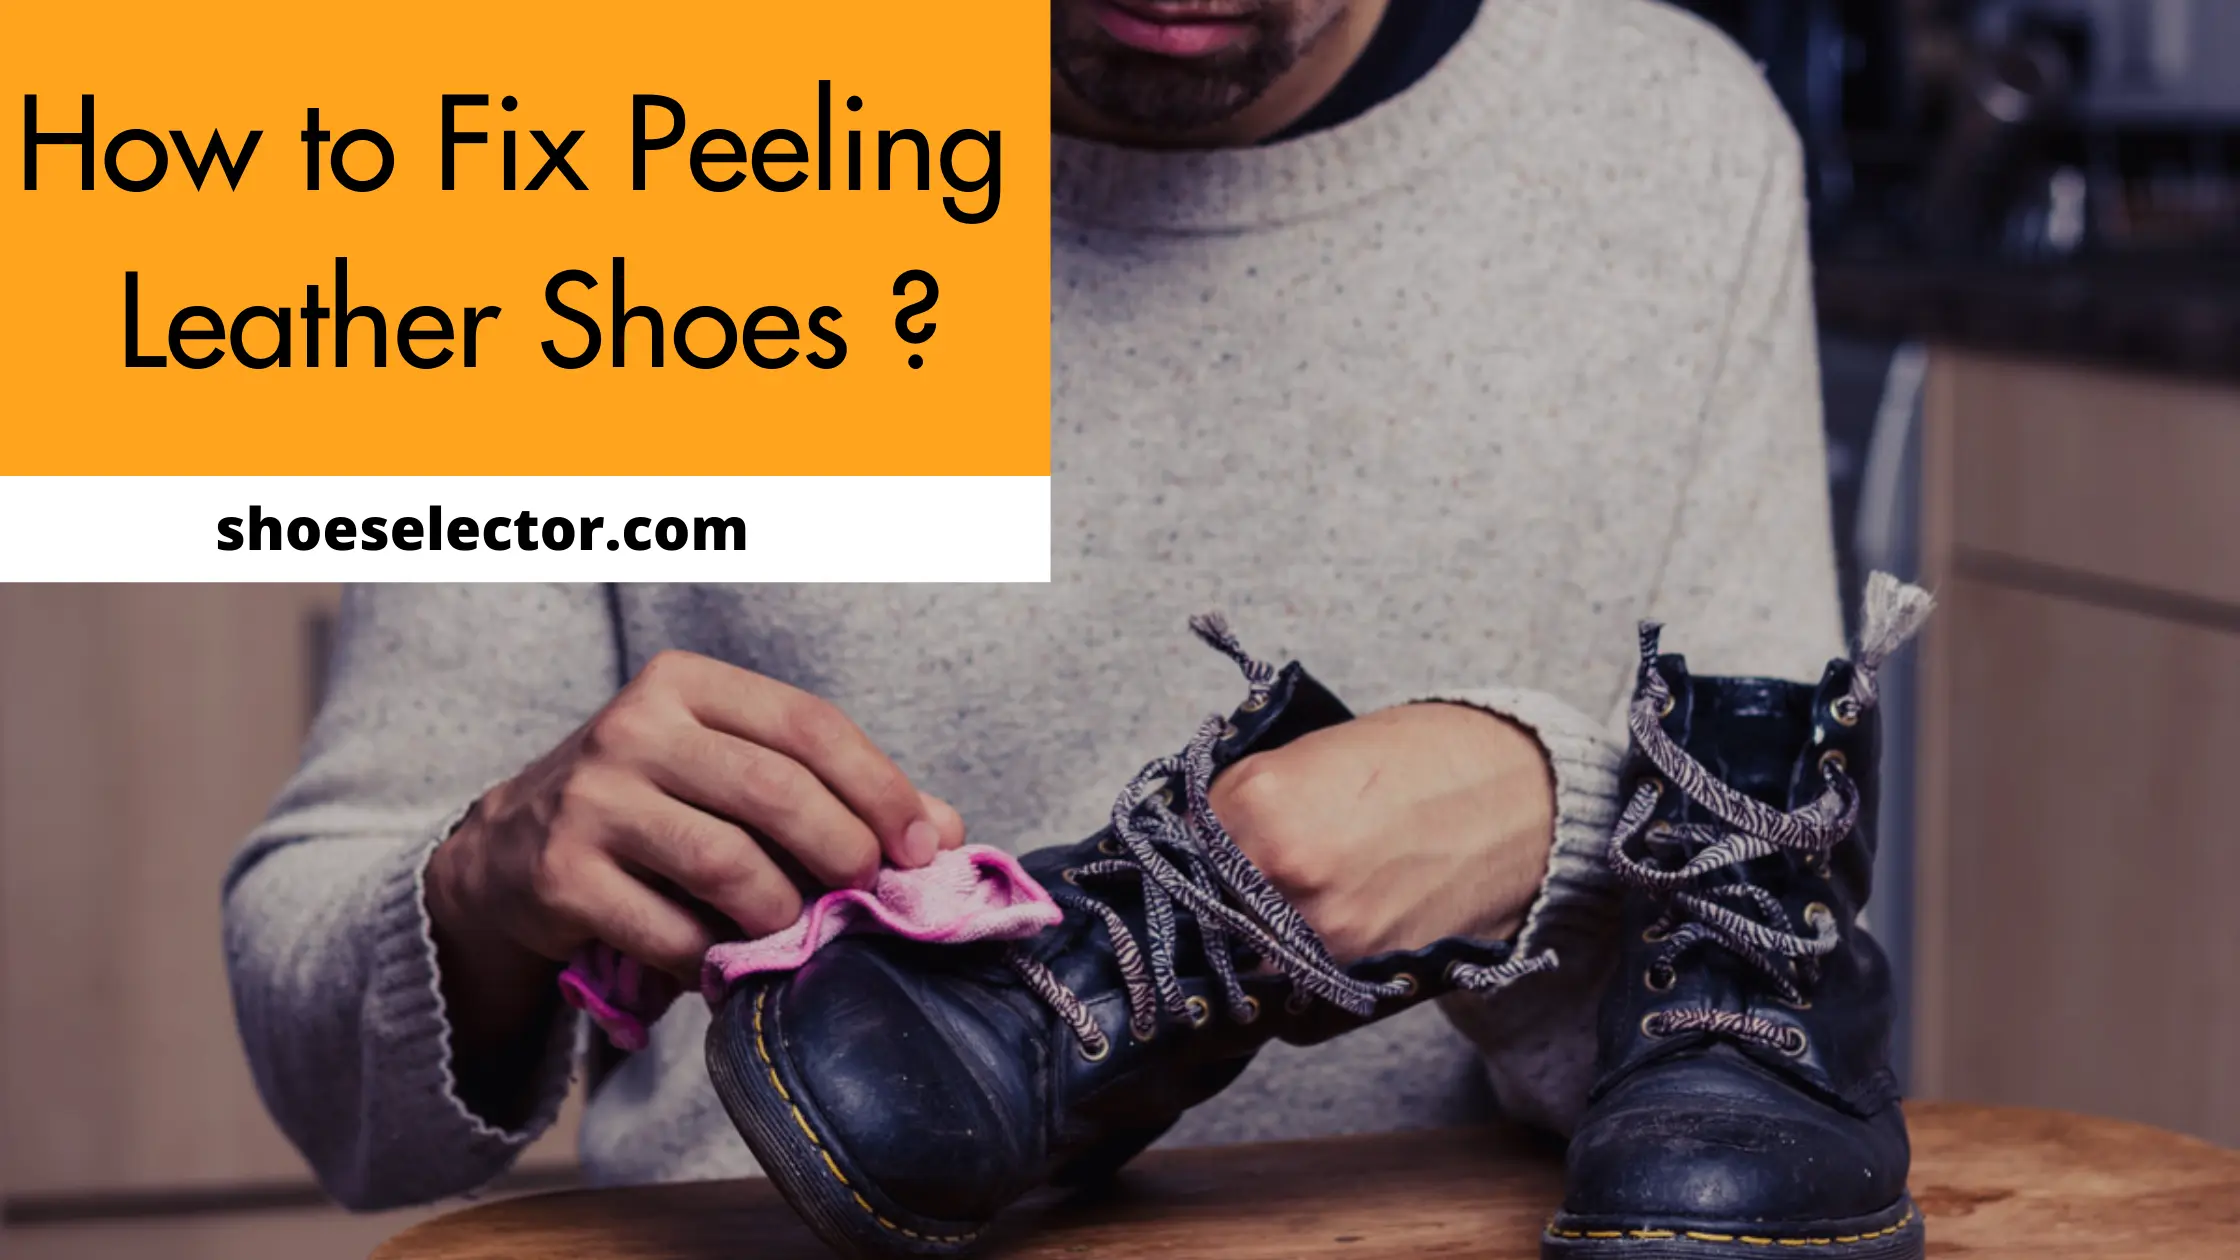 How to Fix Peeling Leather Shoes? - Solution Guide